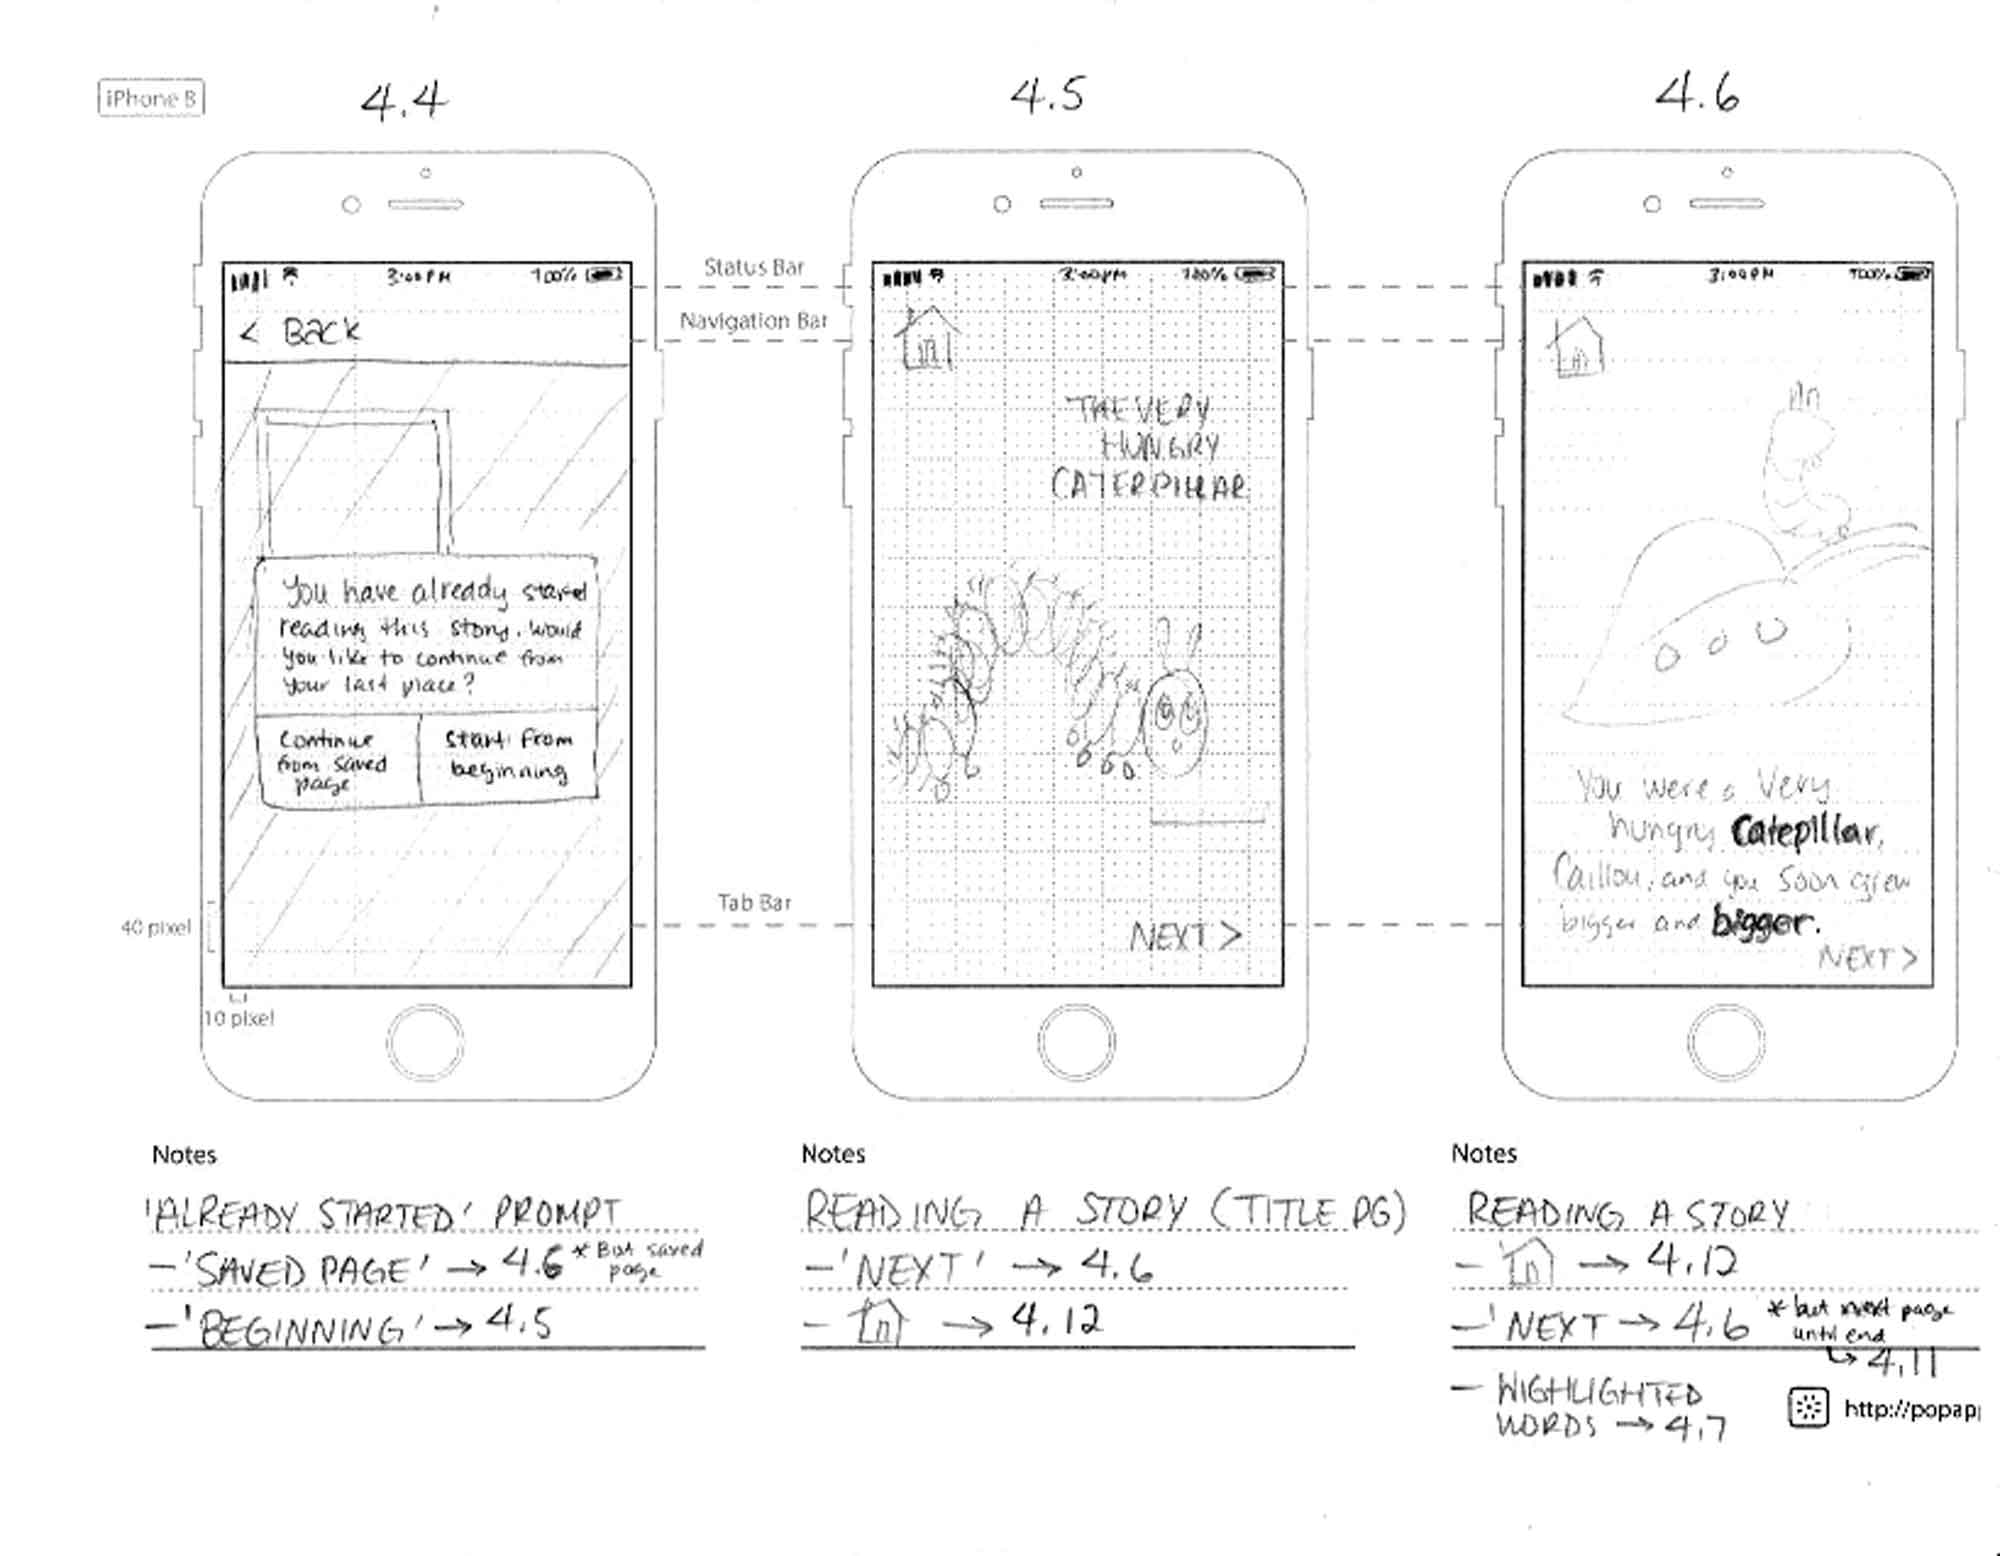 This is an image of app screen sketches for how a story will display when being read.
